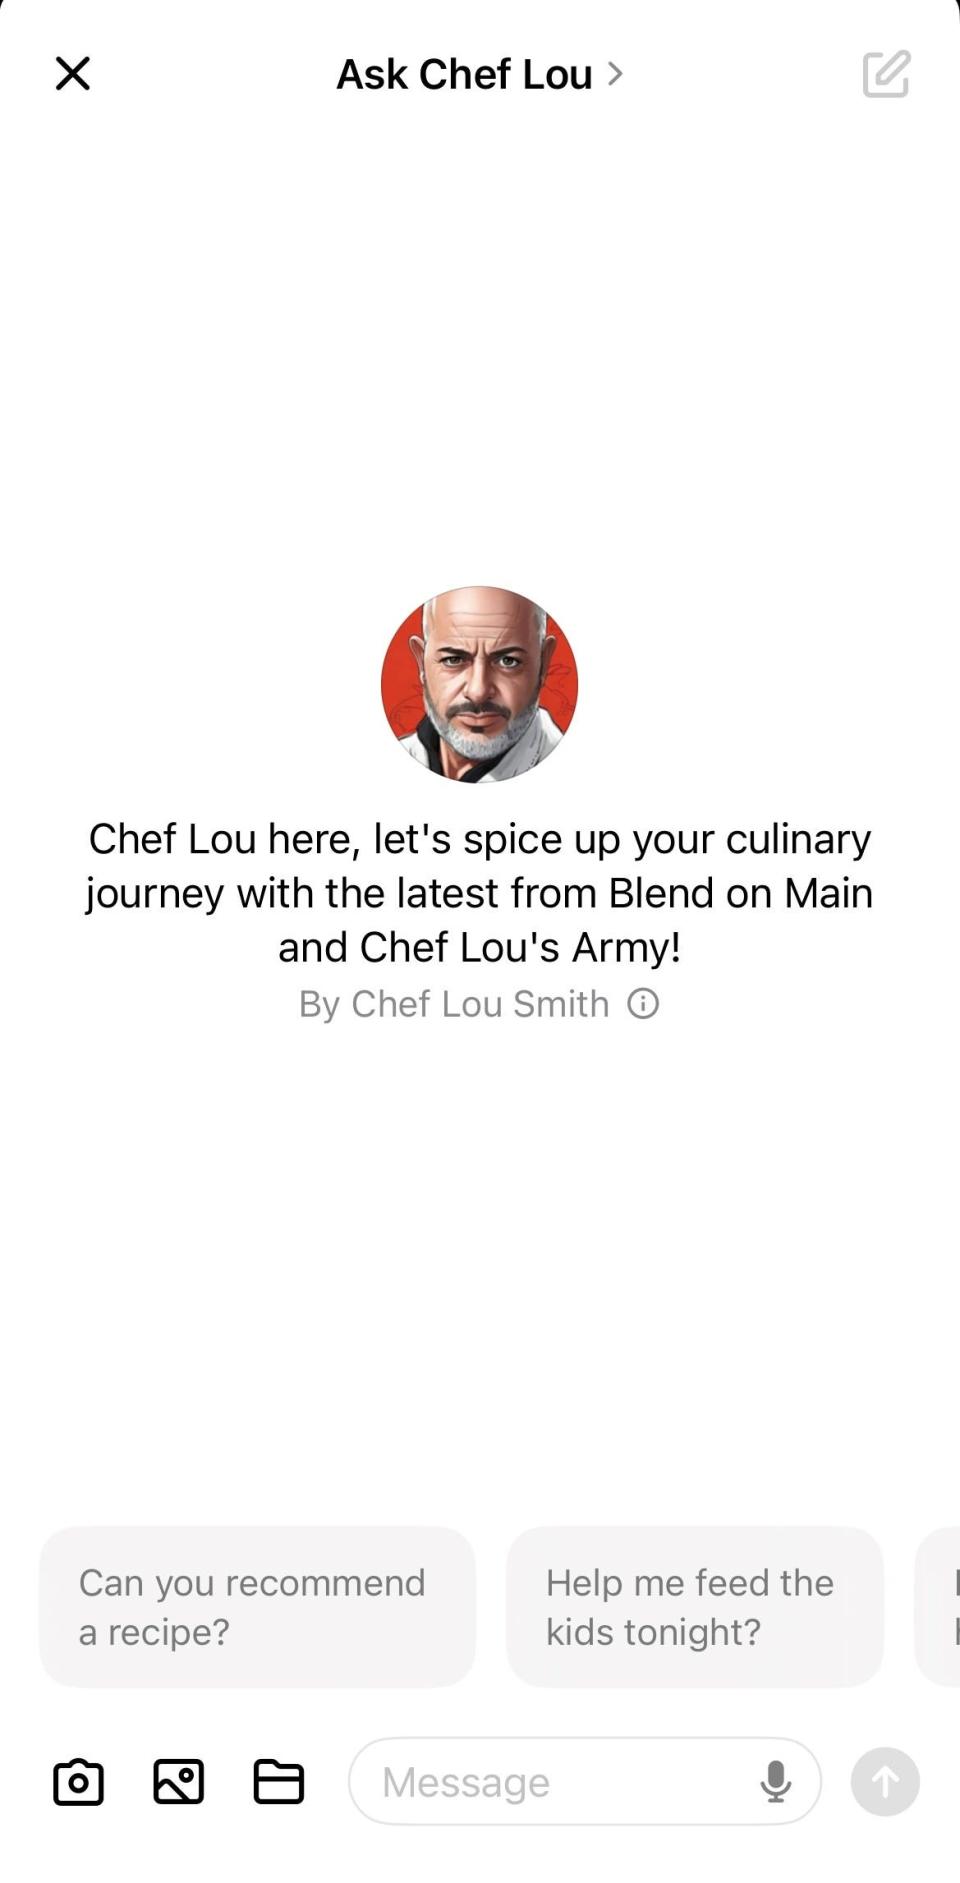 Chef Lou Smith of Blend on Main and The Peach Pit Cafe in Manasquan shares his culinary knowledge via ChatGPT.